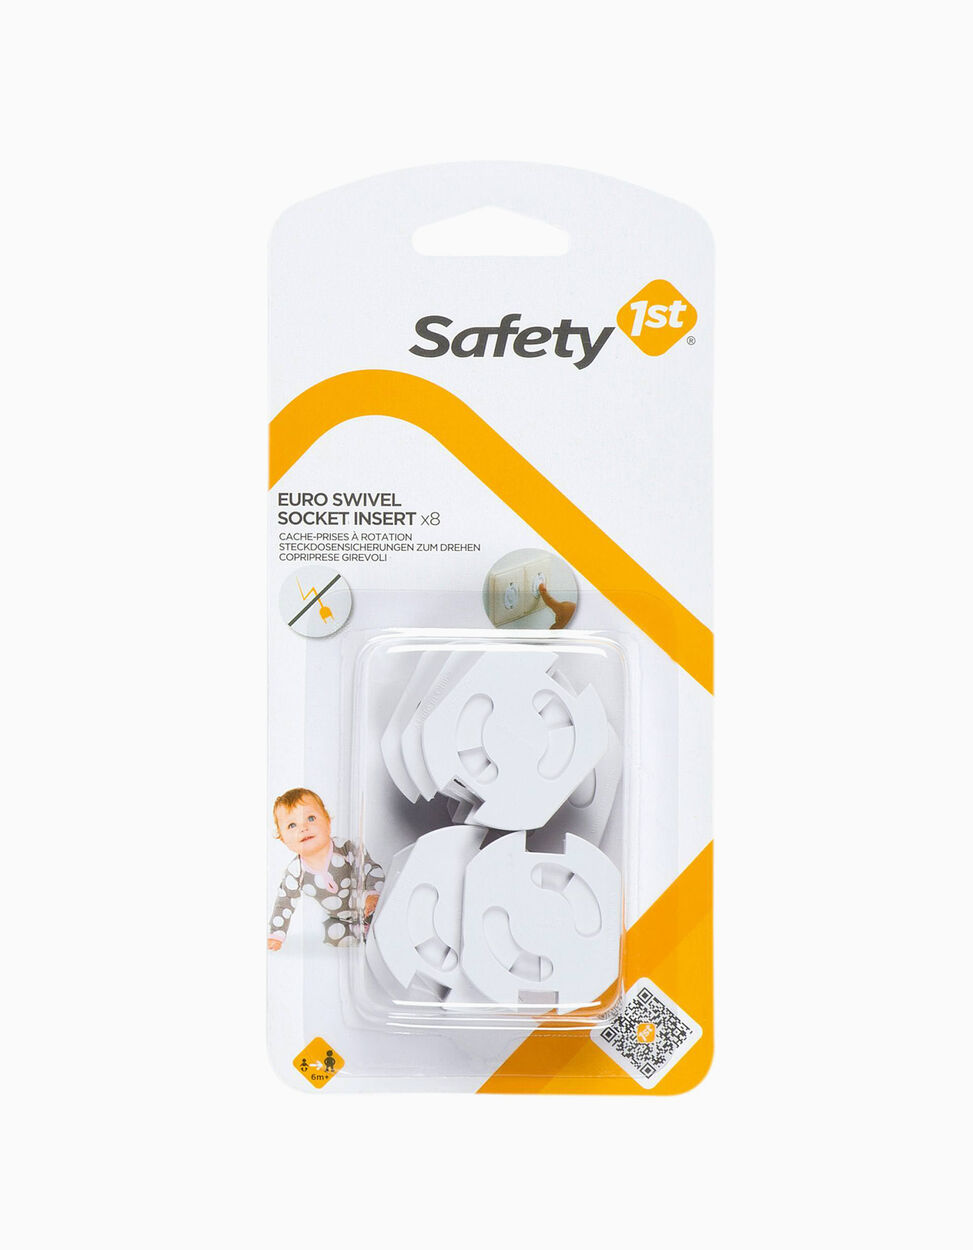 Protector de Enchufes Safety 1st (x8)